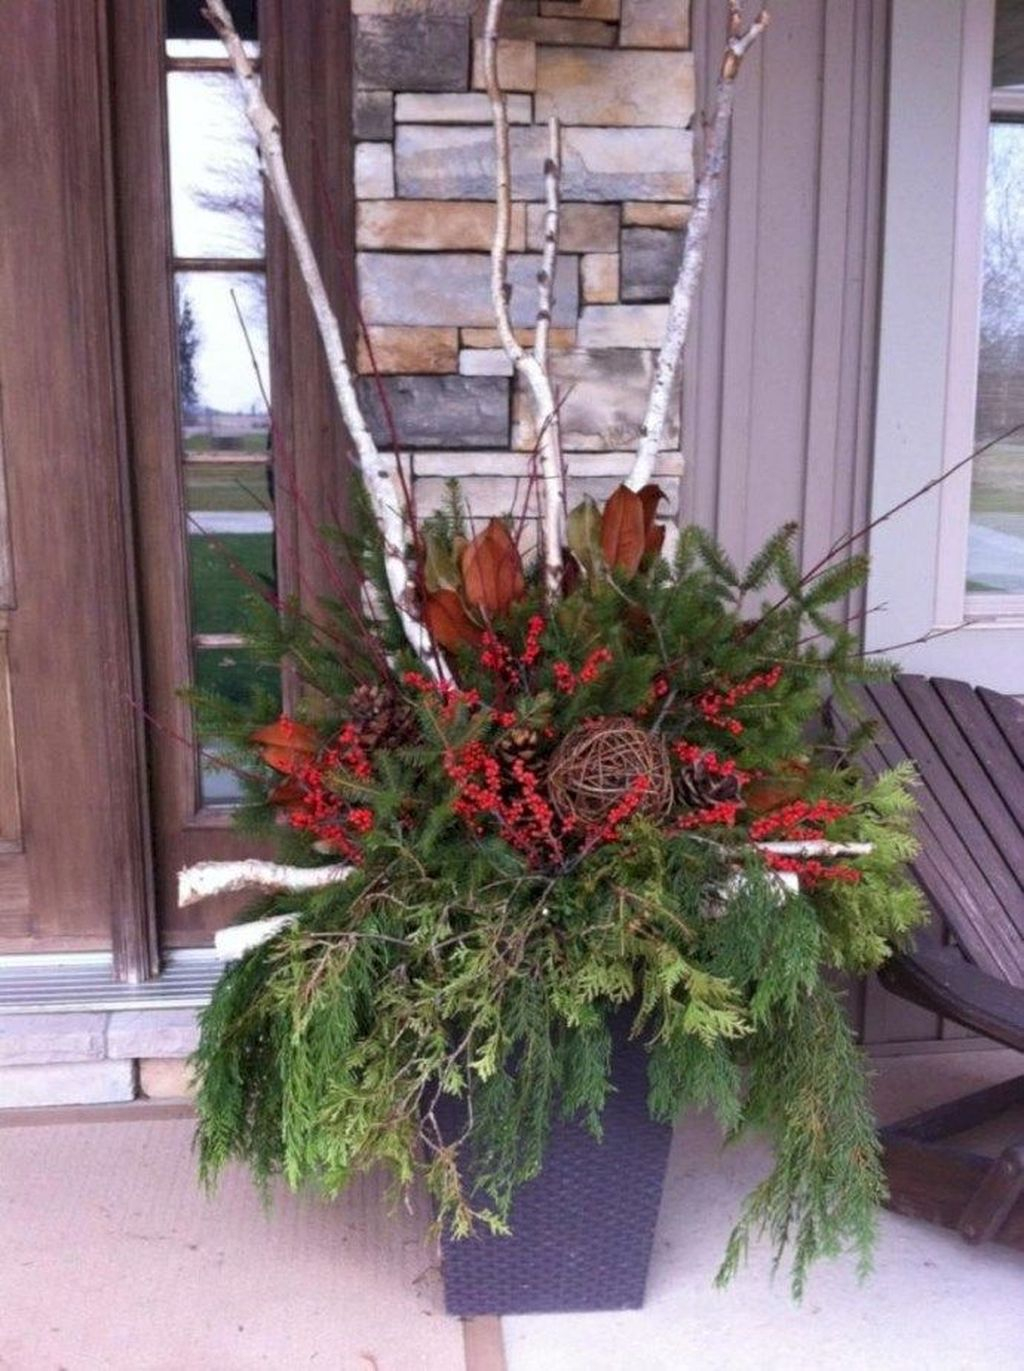 Marvelous Outdoor Holiday Planter Ideas To Beauty Porch Décor 25